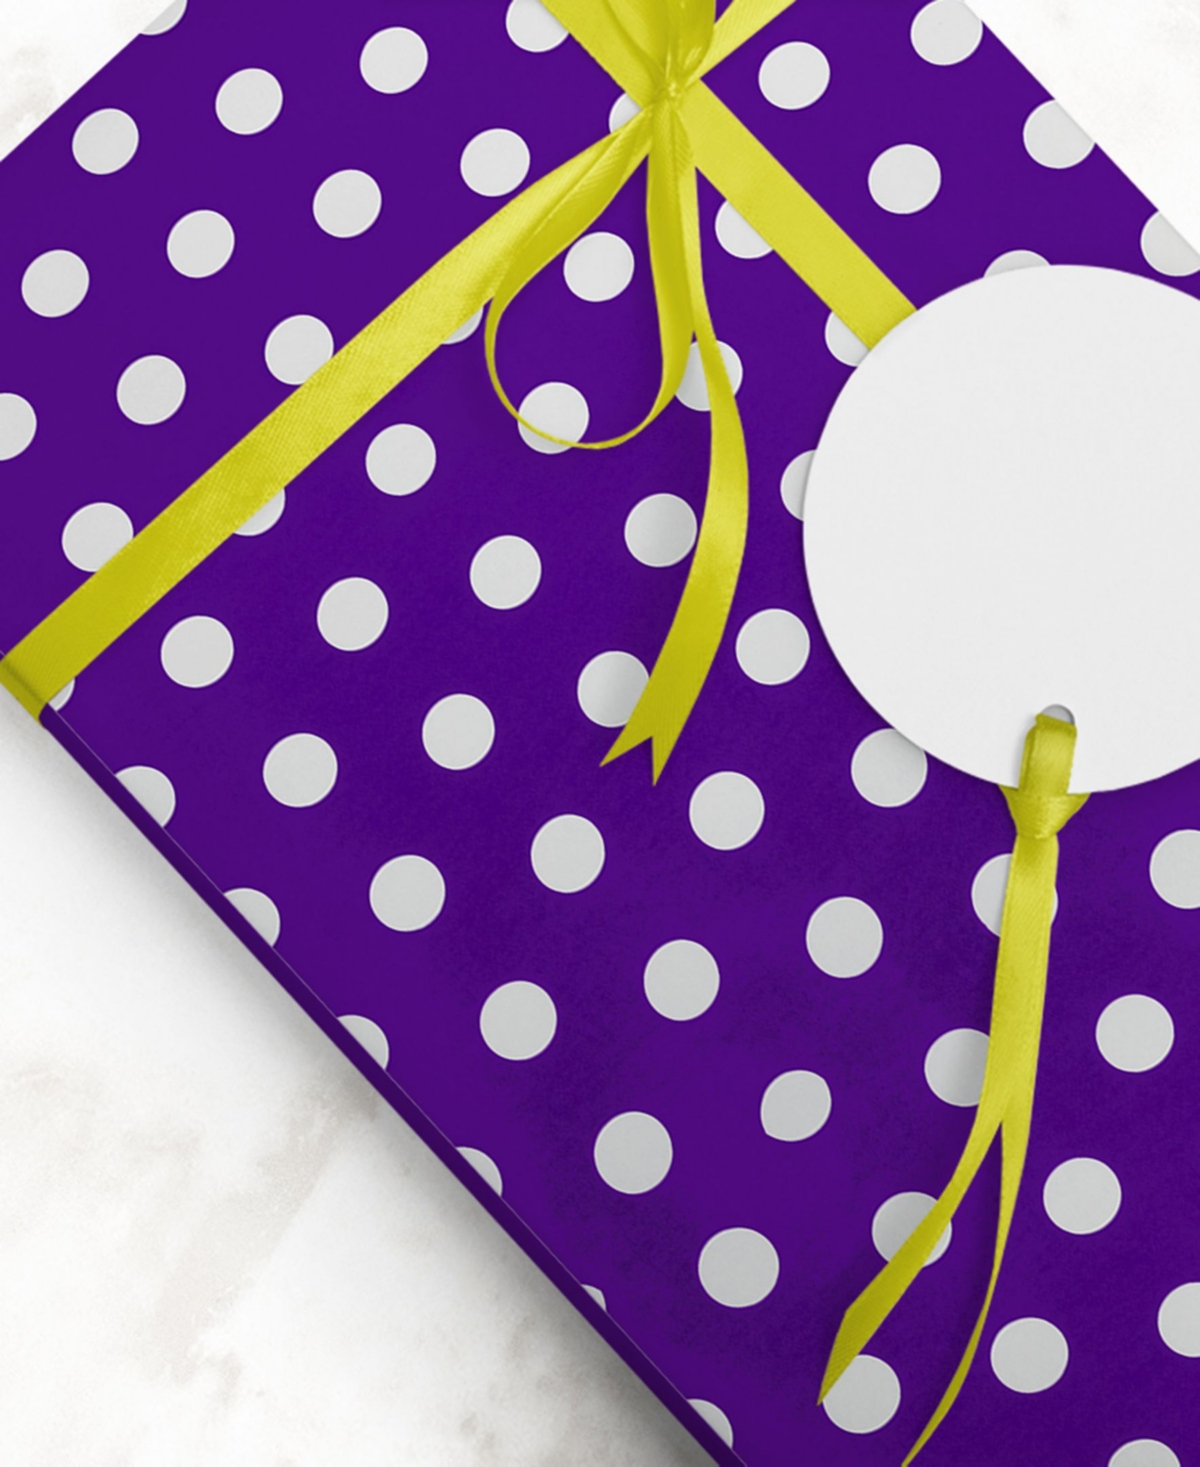 JAM PAPER Gift Wrap Polka Dot Wrapping Paper 25 Sq Ft per Roll